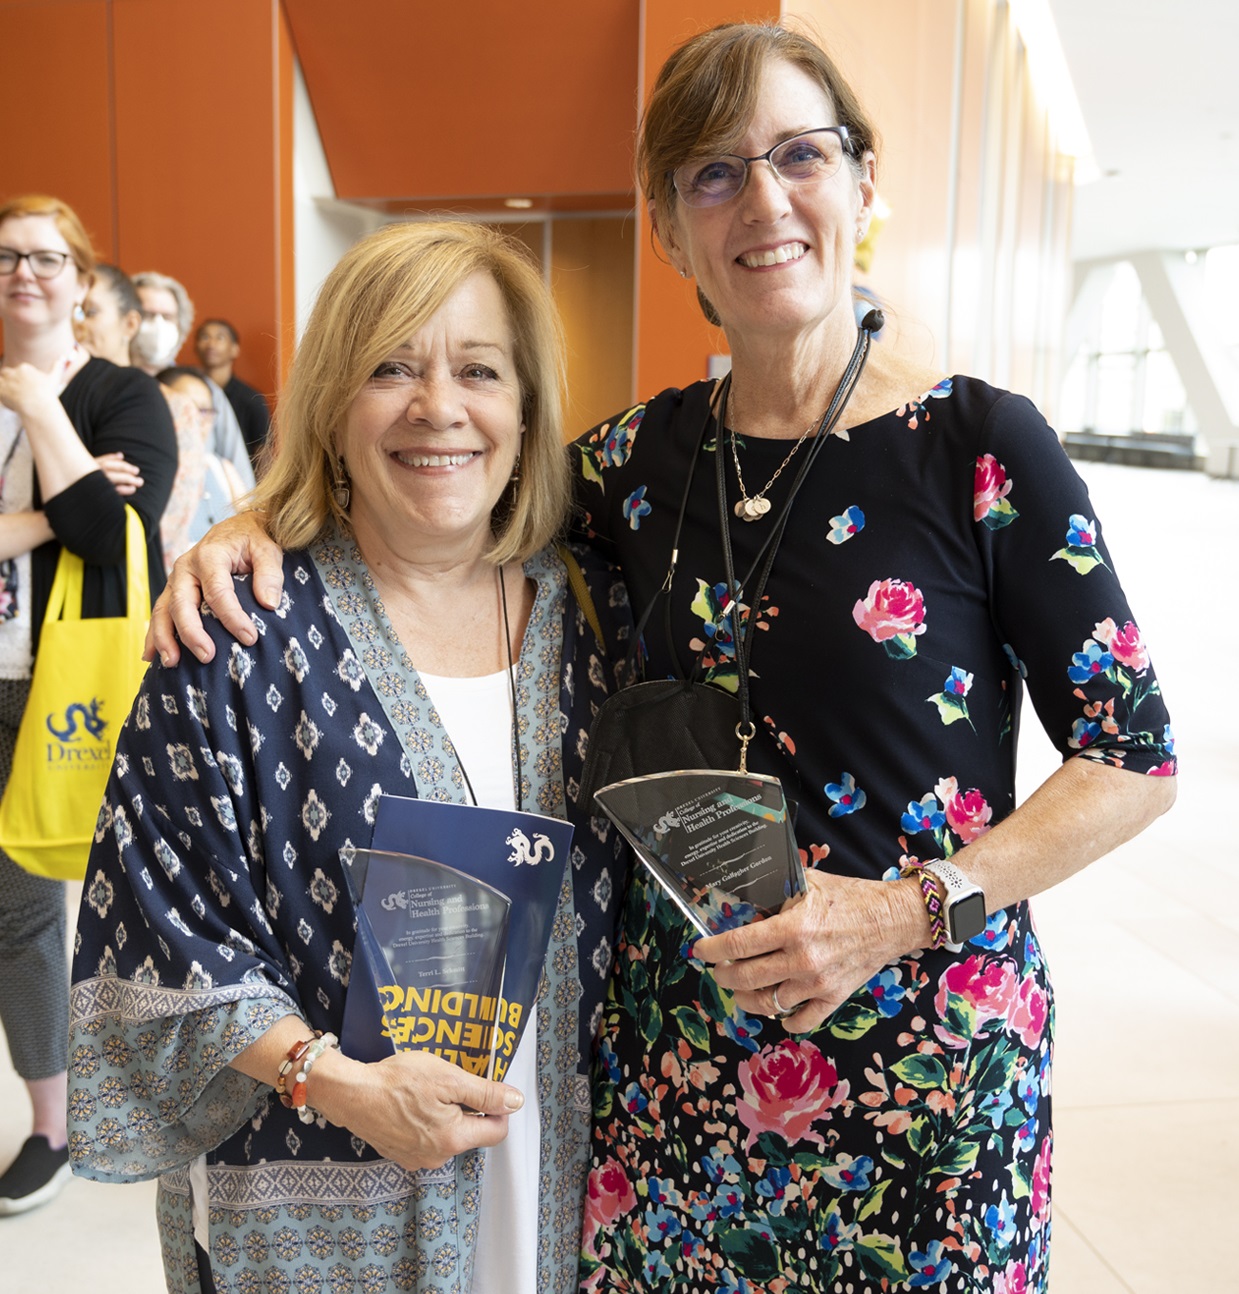 Terri Schmitt and Mary Gallagher Gordon, PhD holding their recognition awards during the College of Nursing and Health Professions open house in the new Drexel Health Science Building.